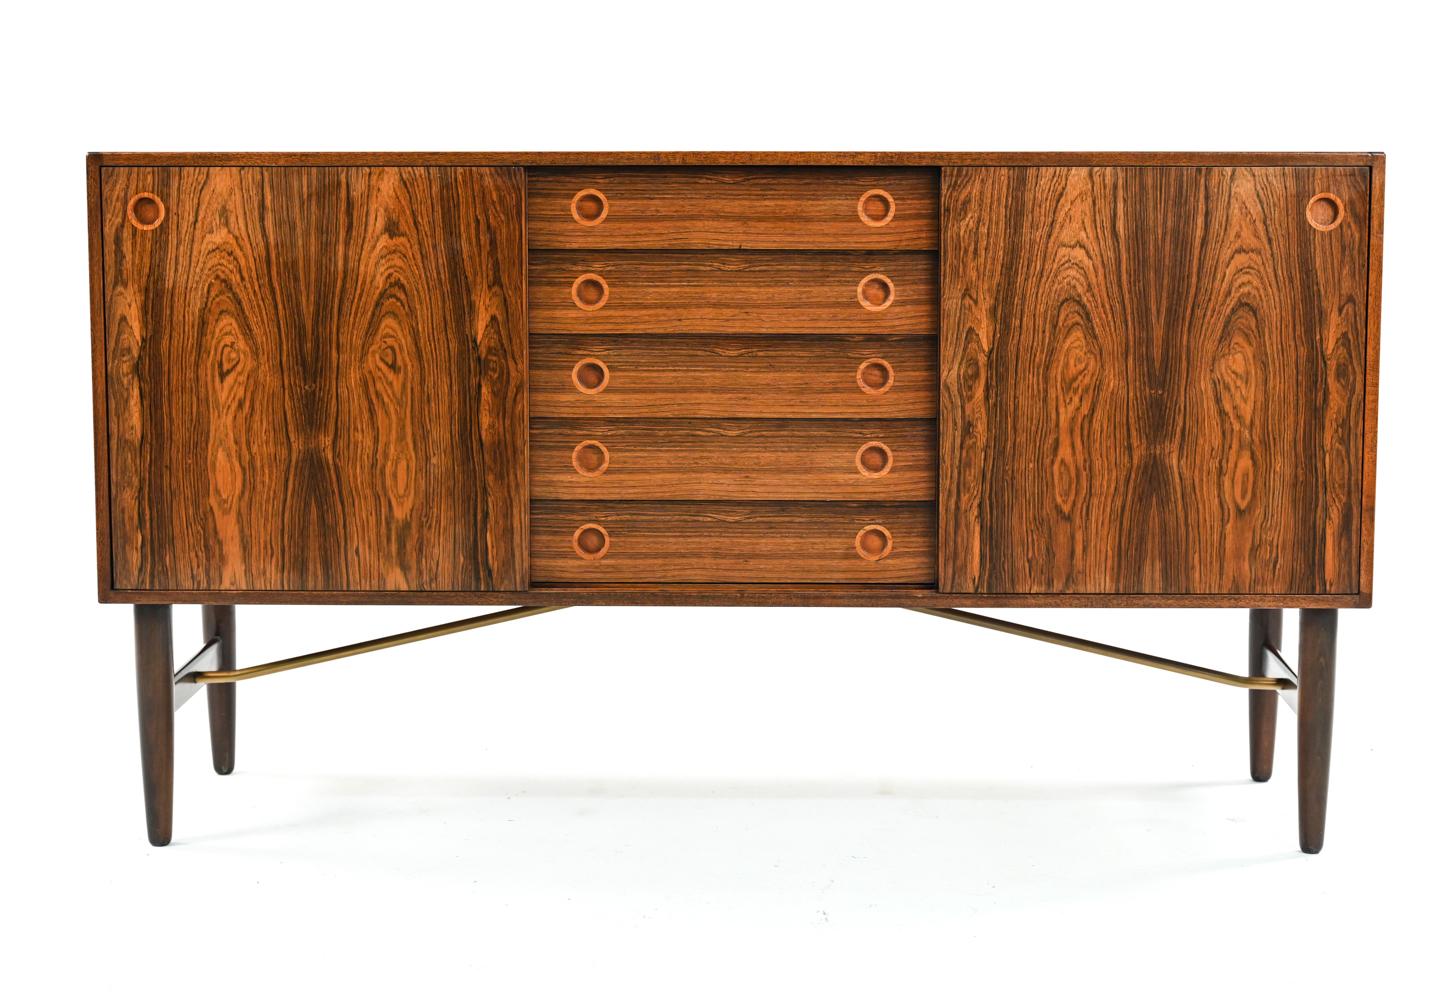 A handsome Scandinavian modern sideboard designed by Hans Hove & Palle Petersen. Produced by Christian Linneberg in Denmark, c. 1960's. Featuring round drawer pulls, tapered legs, bookmatched rosewood veneer, and a metal stretcher. Quality of work